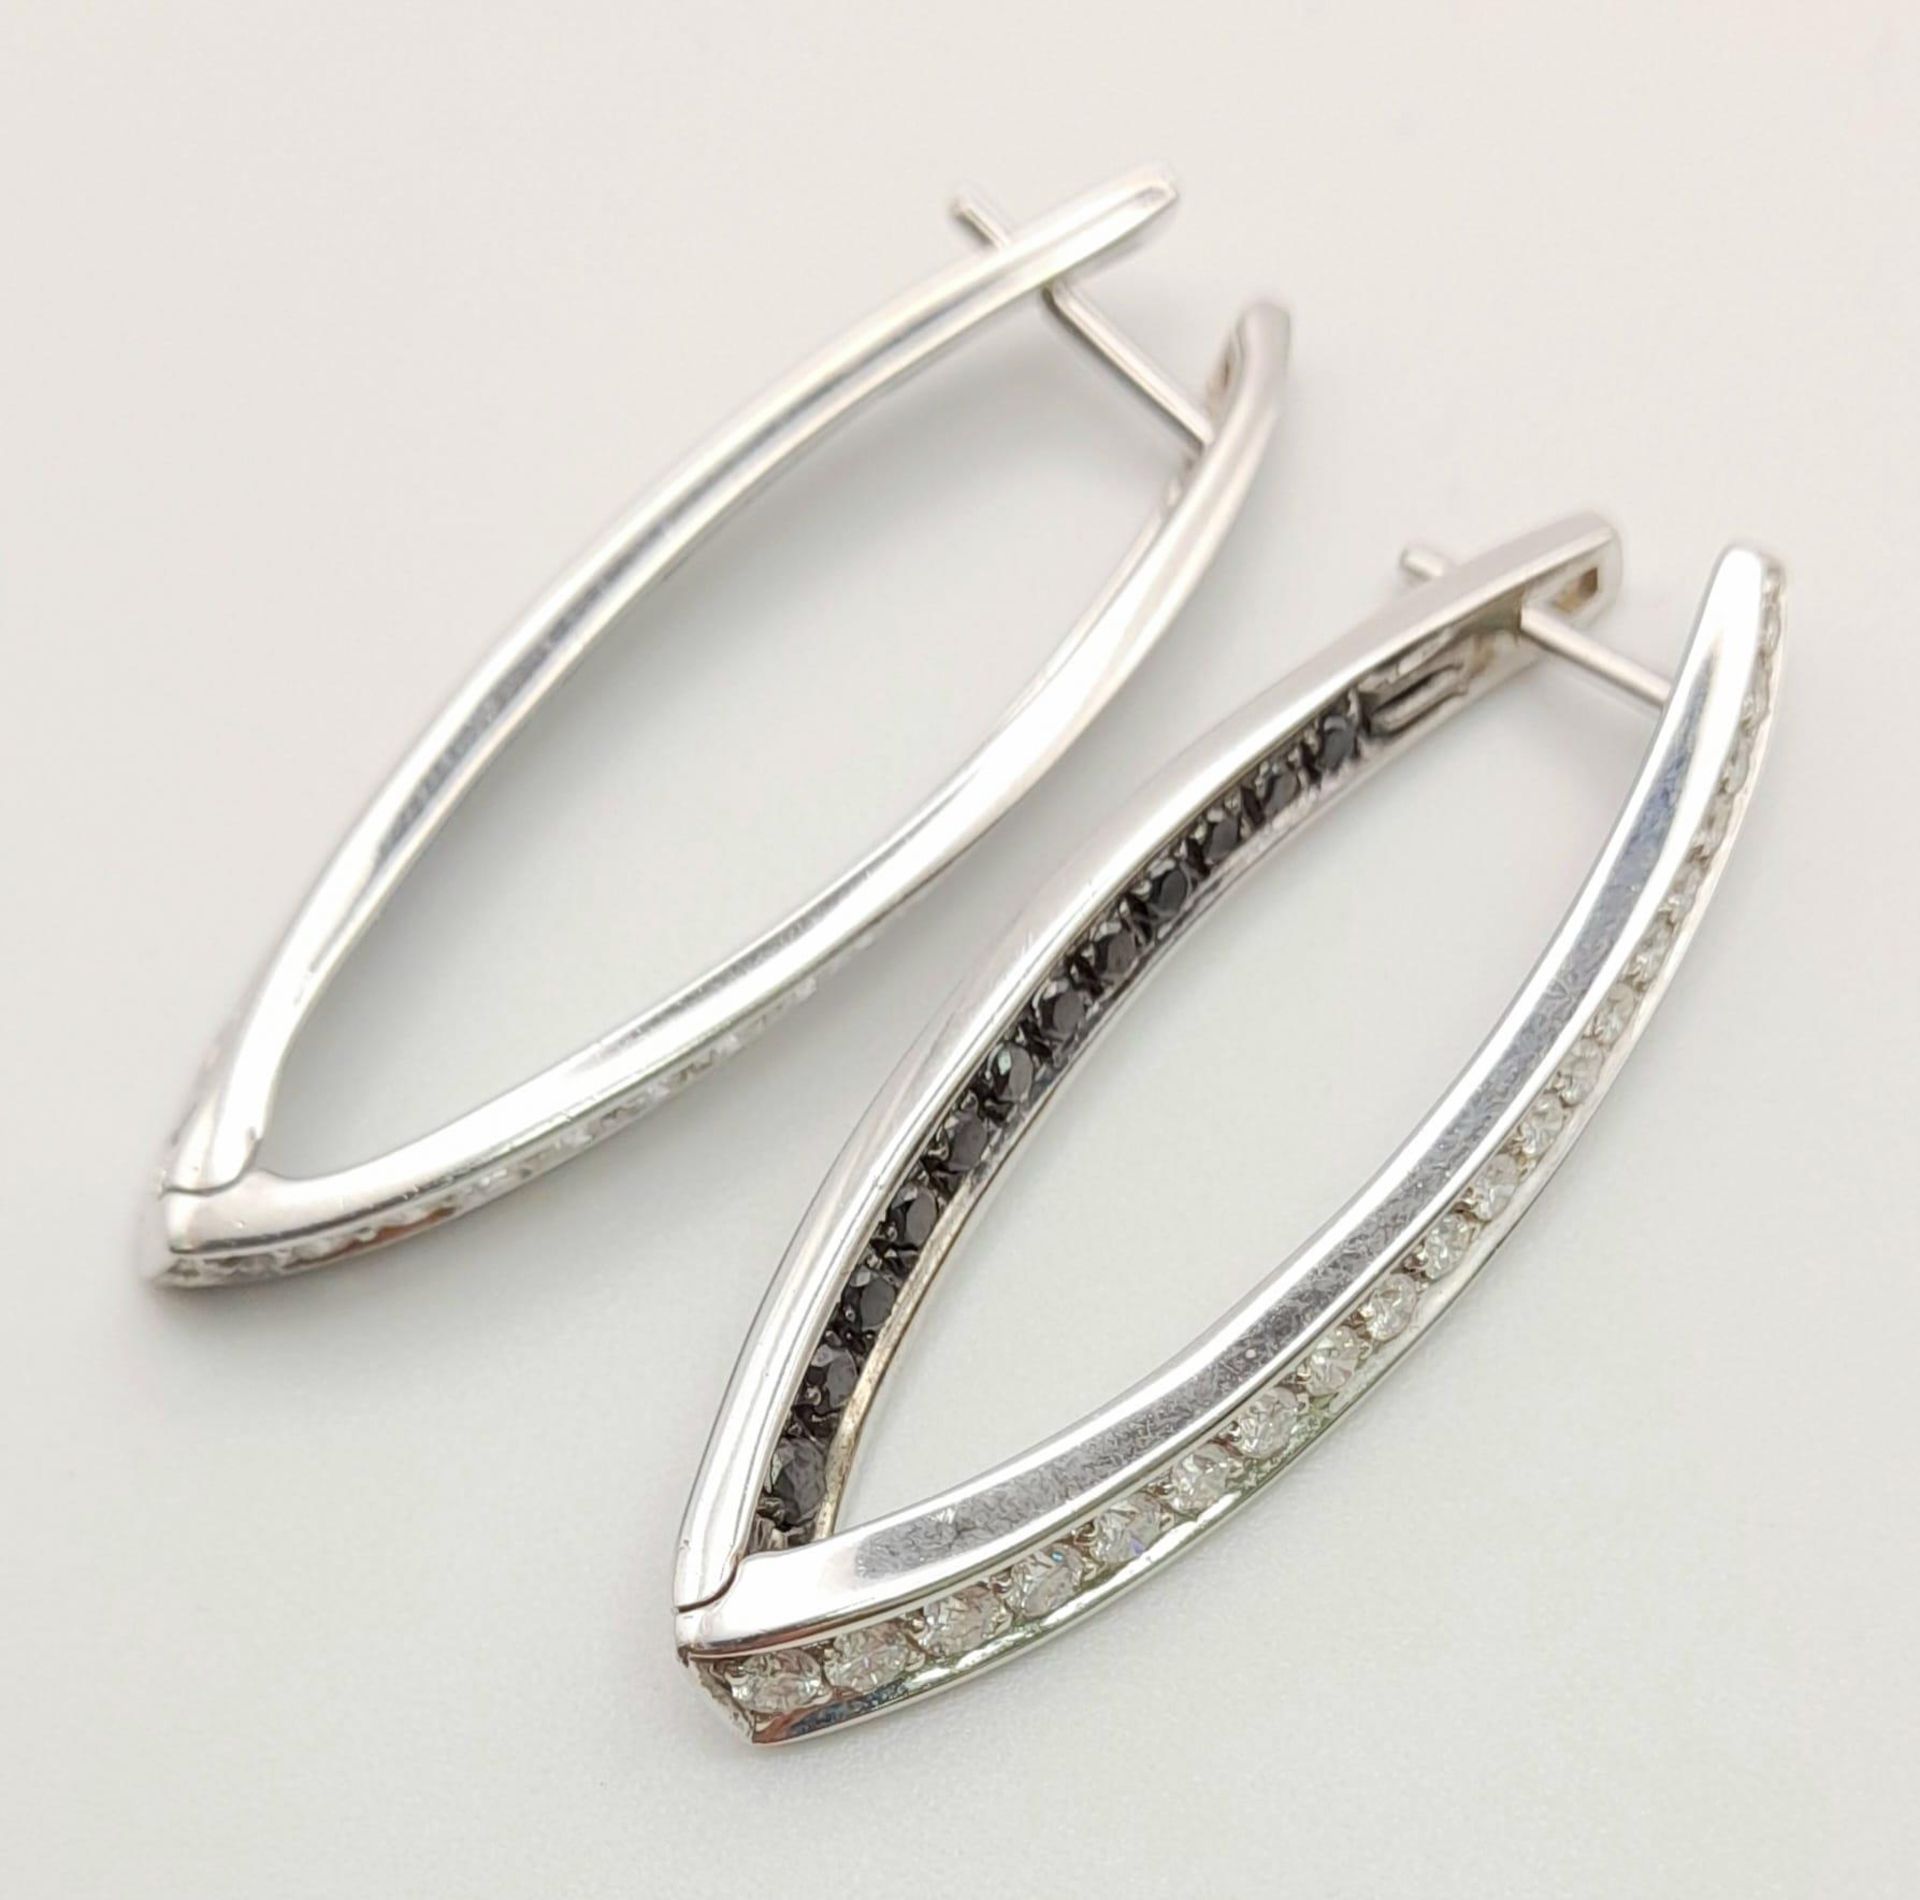 A Pair of Designer Palmiero 18K White Gold, Black and White Diamond Elongated Hoop Earrings. 0. - Image 4 of 9